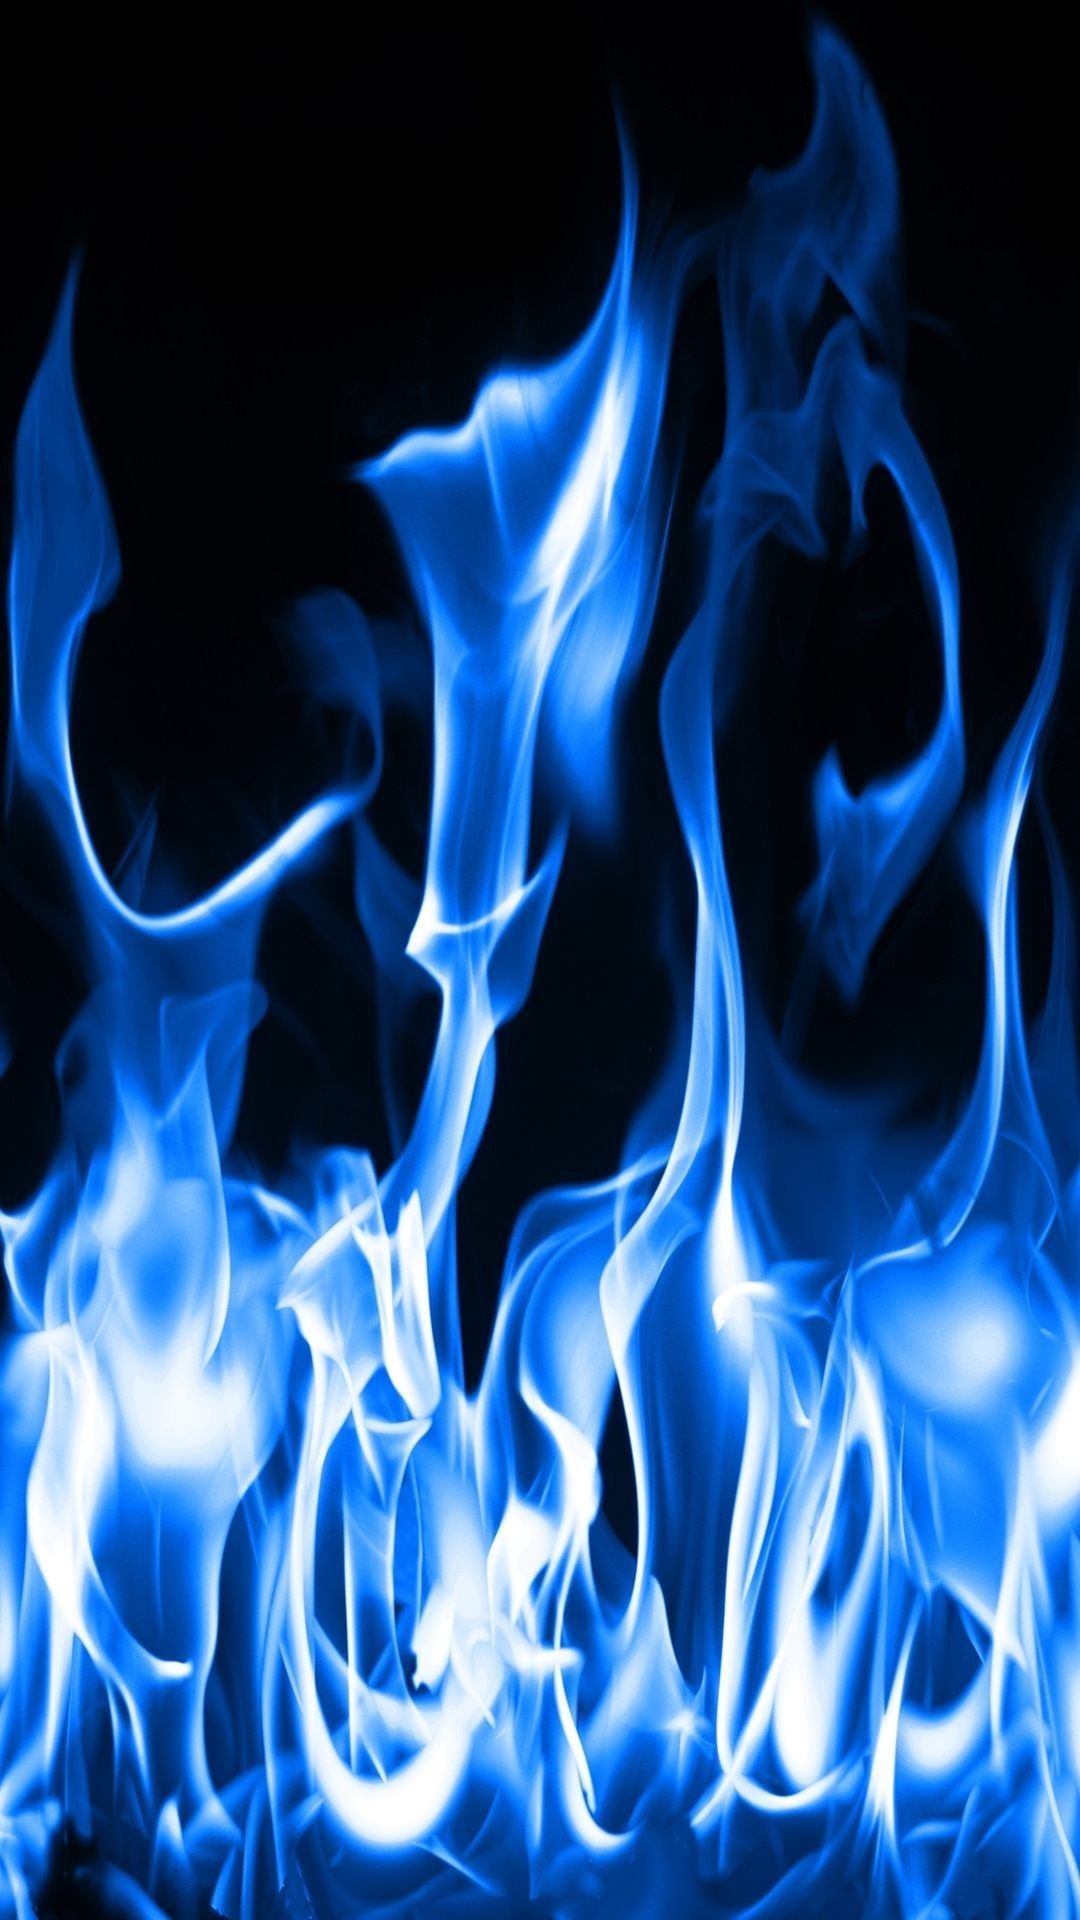 Abstract Flames iPhone 6 Plus Wallpaper, fire iPhone 6